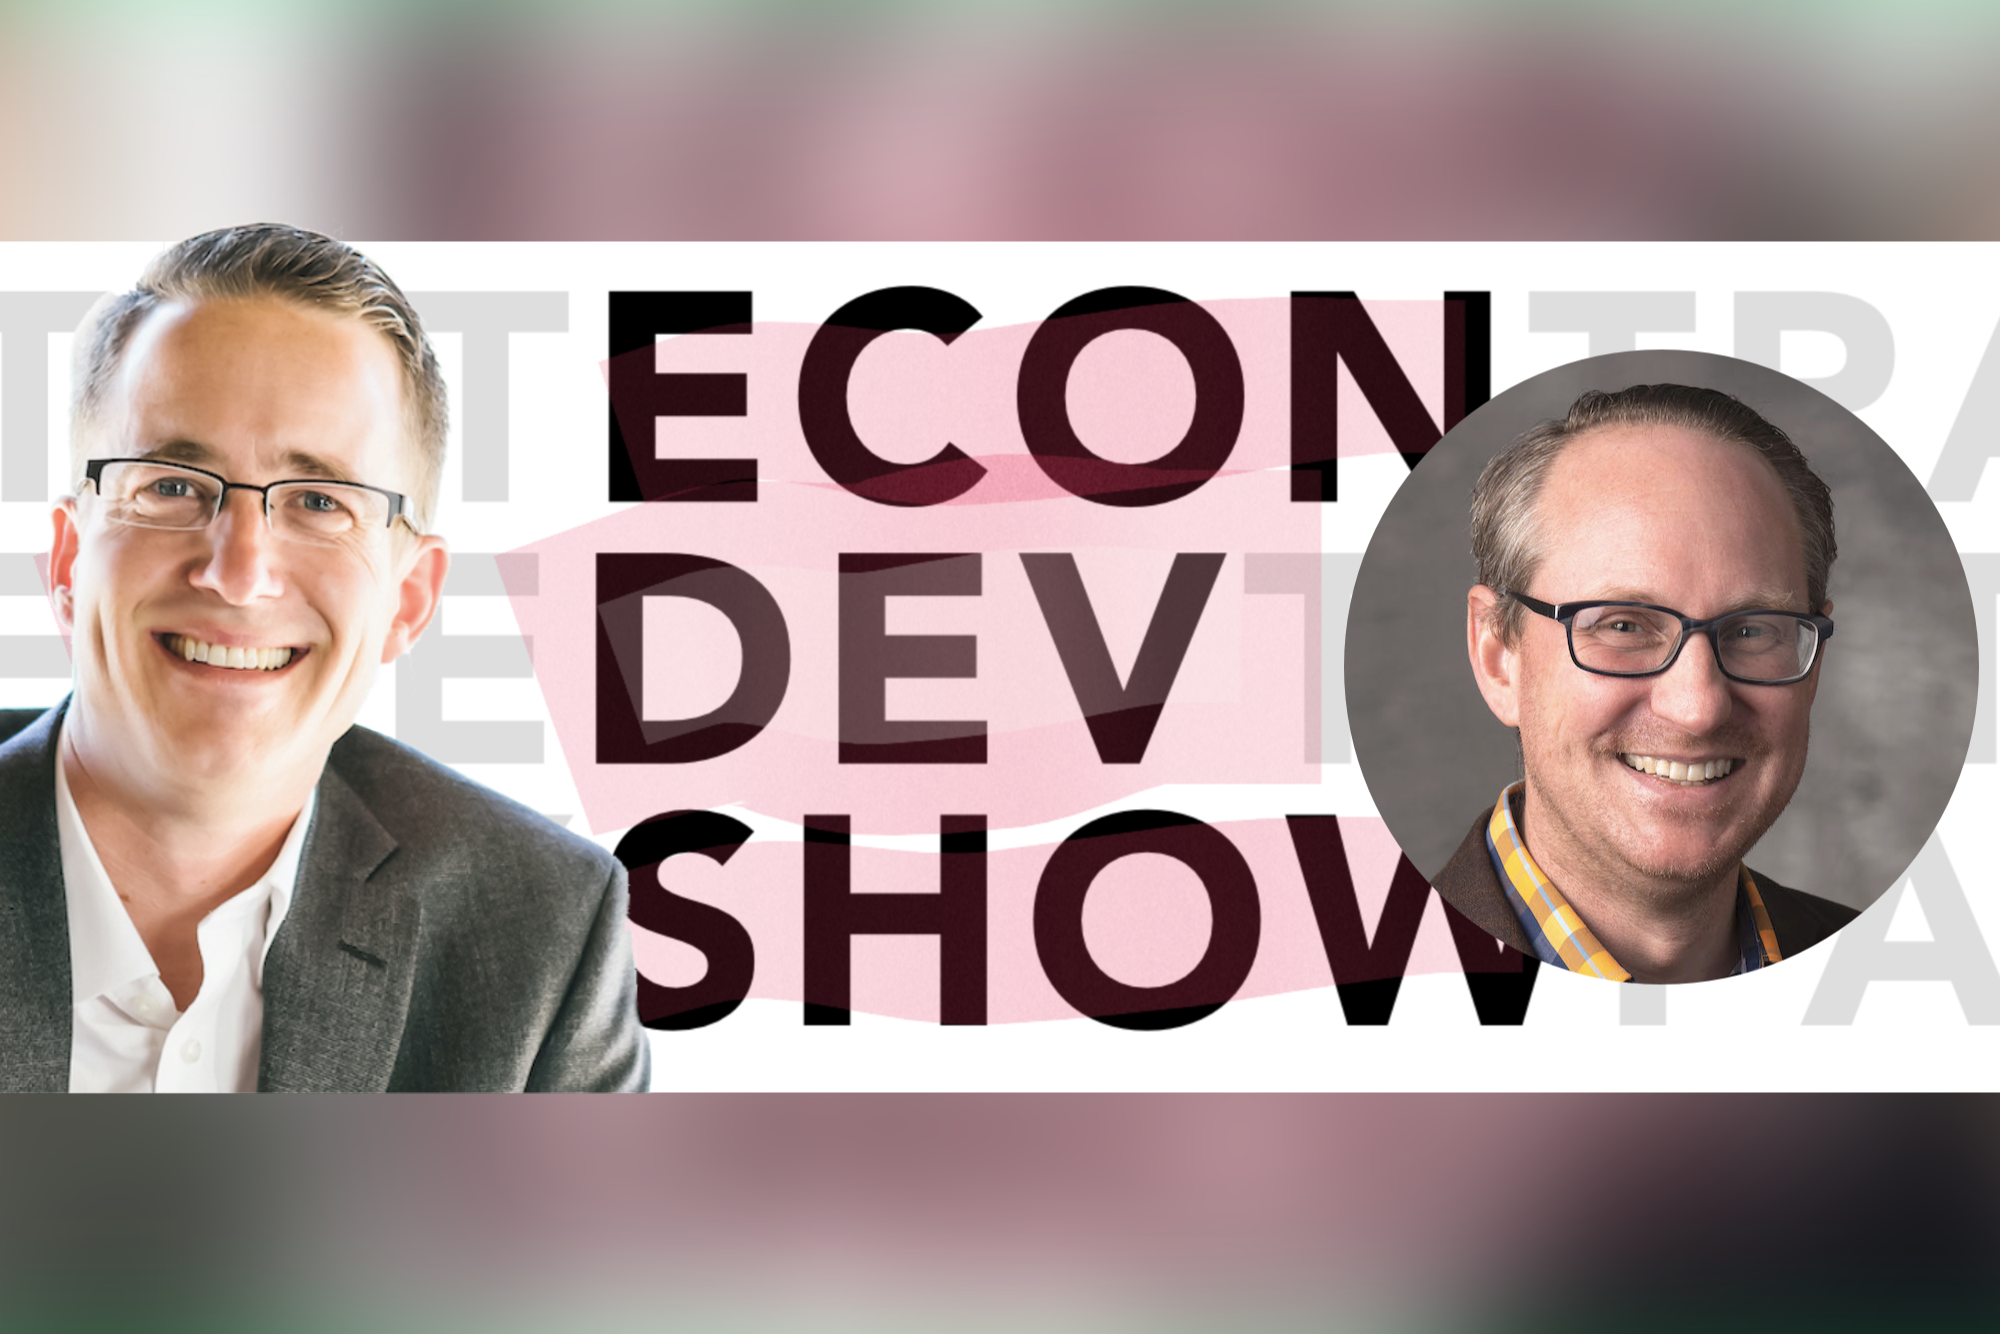 Podcast Episode 68 - How Creating Housing Density Can Solve Economic Challenges with Scott Graves